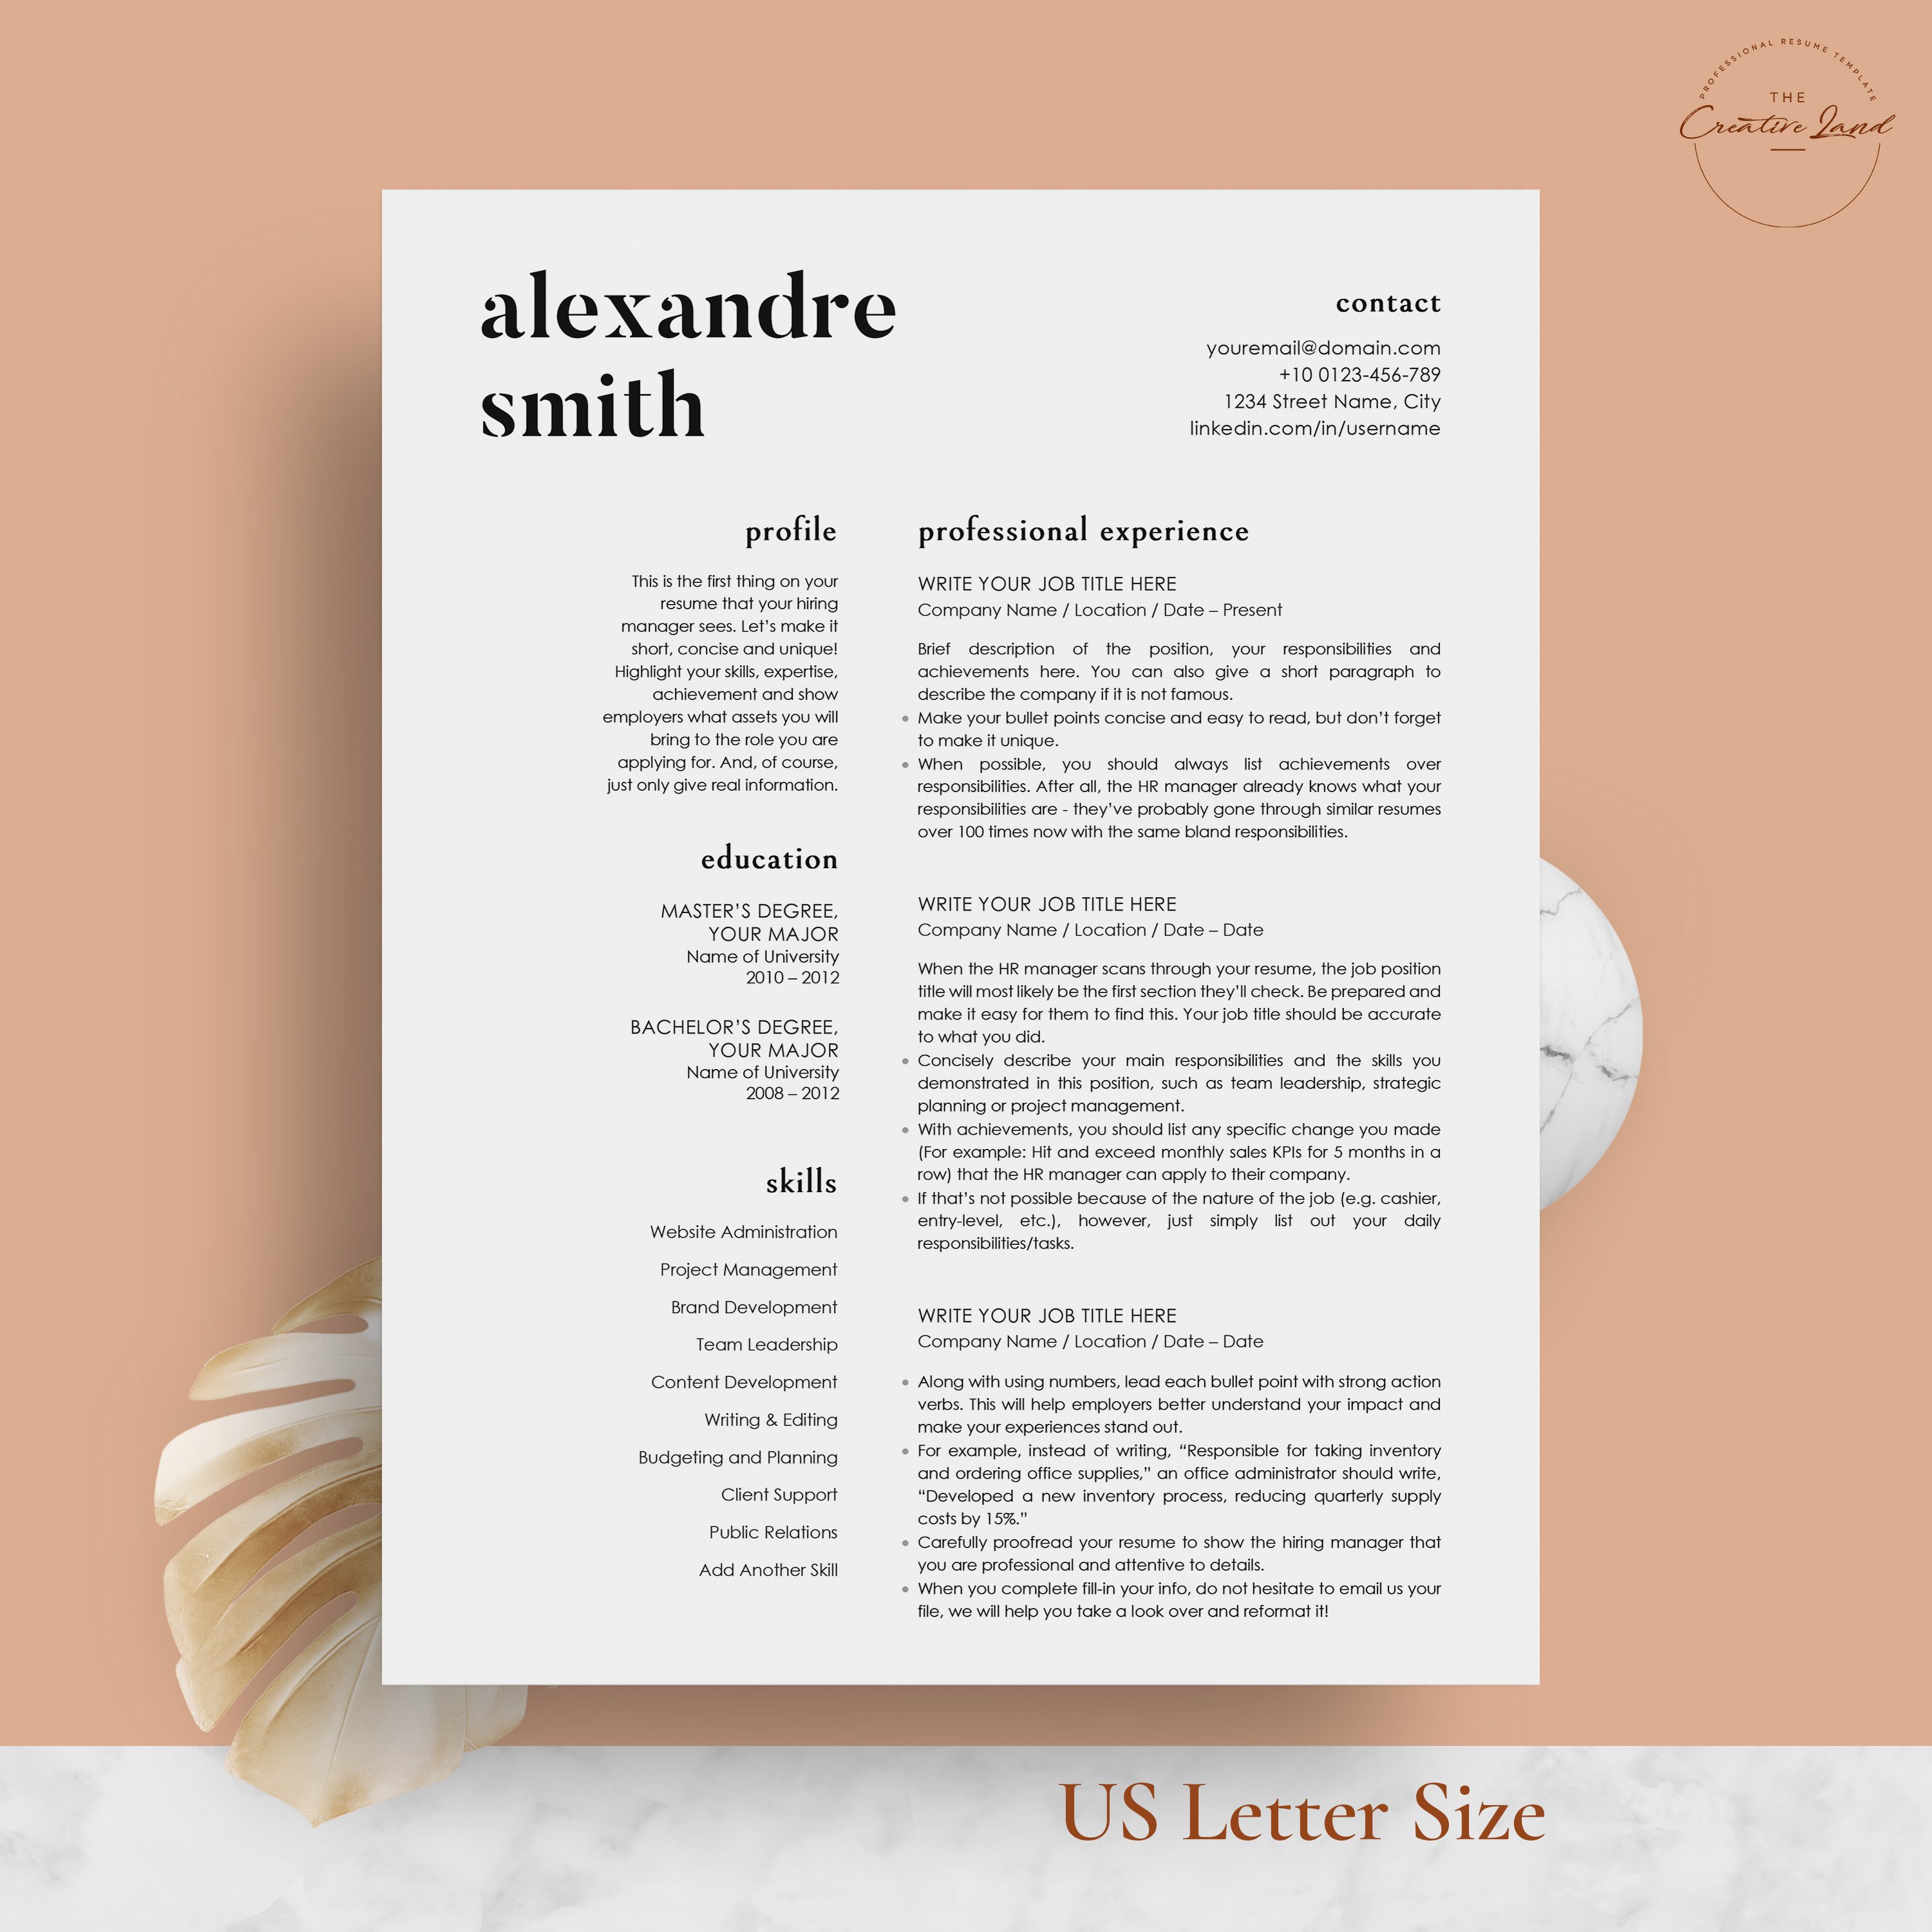 Resume/CV - The Smith preview image.